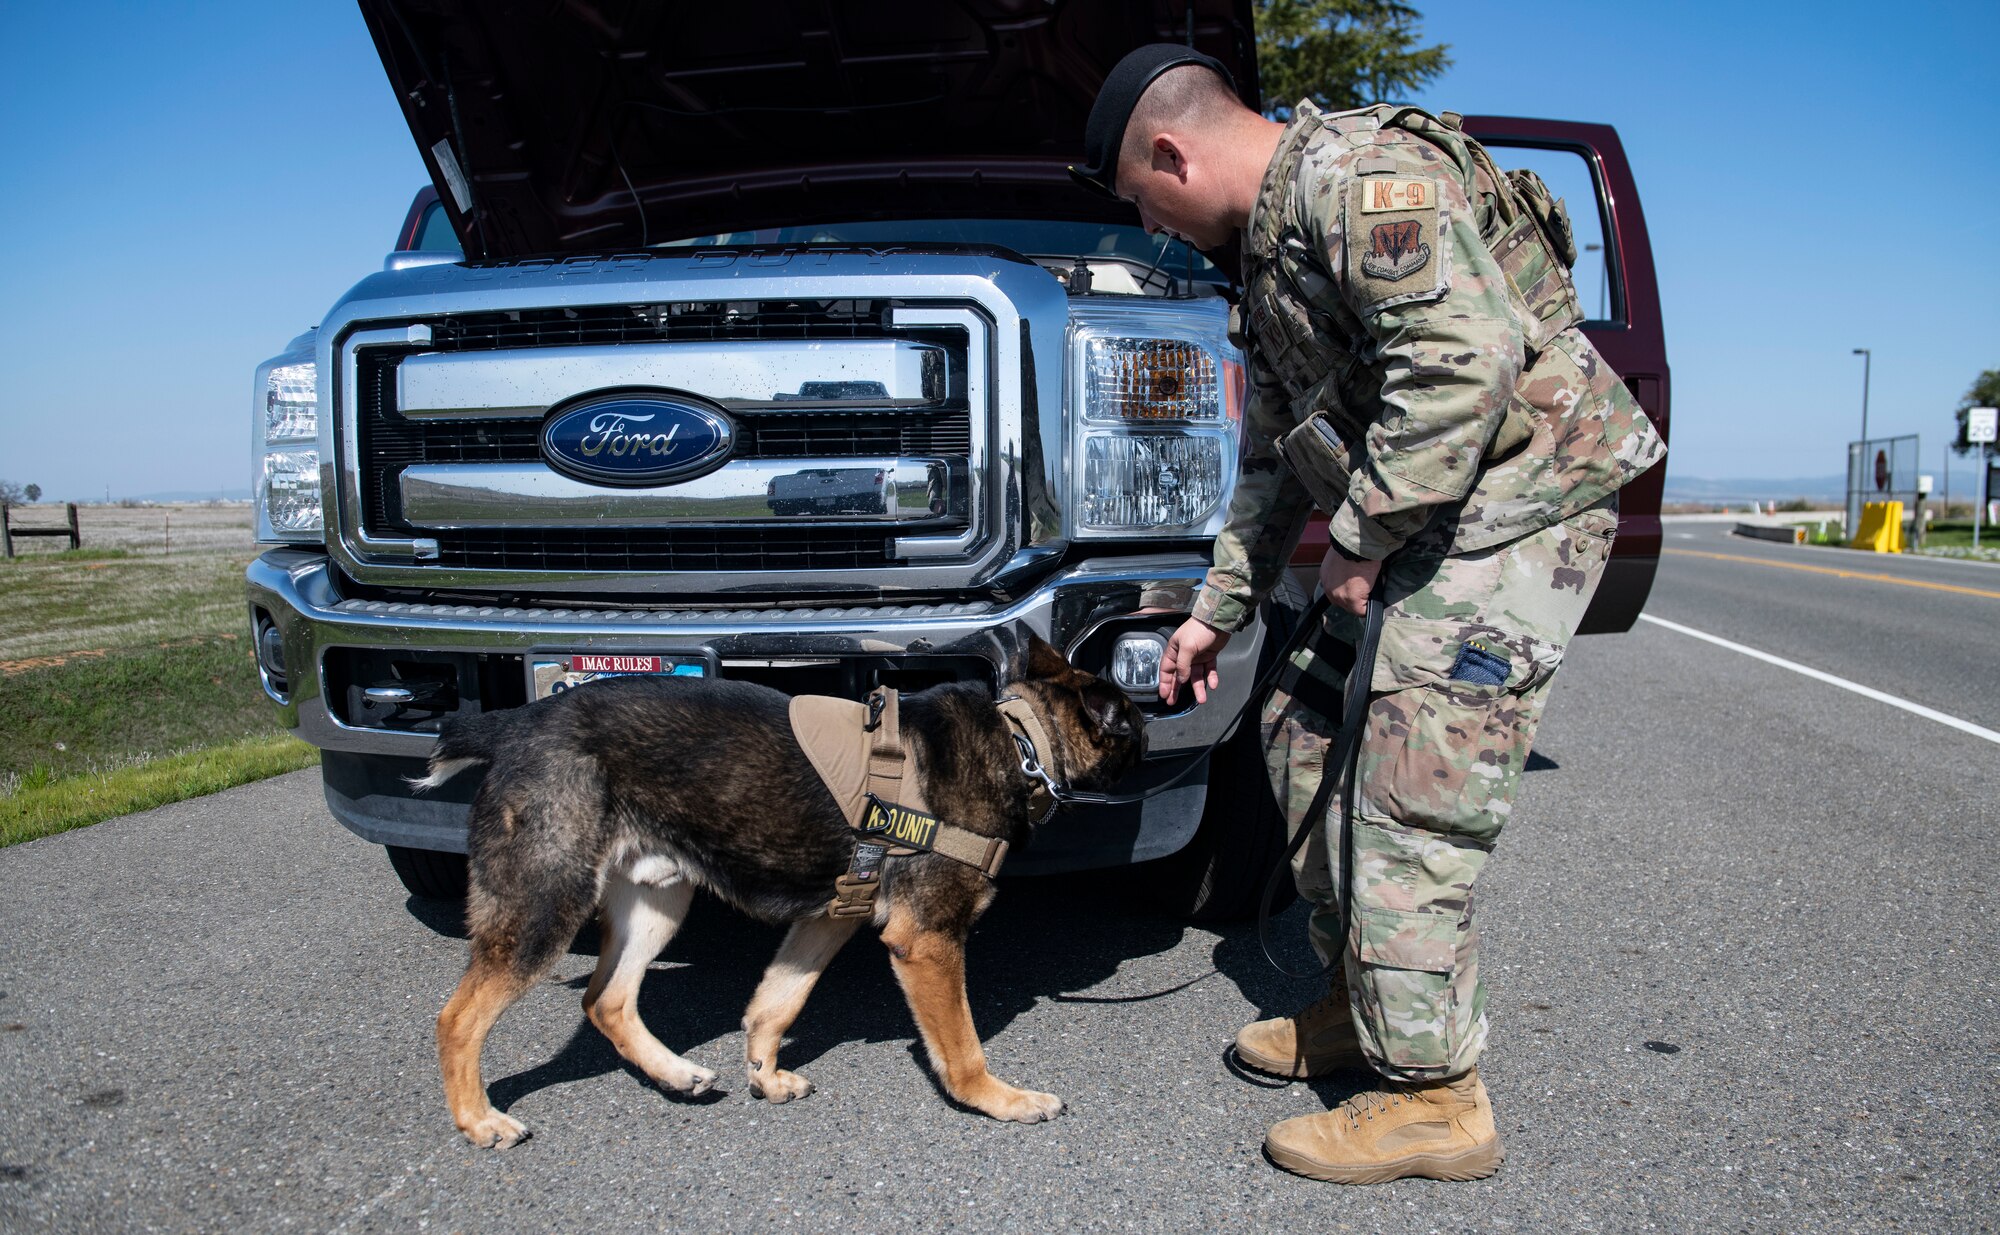 Staff Sgt. Jason Herrier, 9th Security Forces Squadron (SFS) military working dog (MWD) handler and Bady 2, 9th SFS MWD search a vehicle leaving Beale Air Force Base.